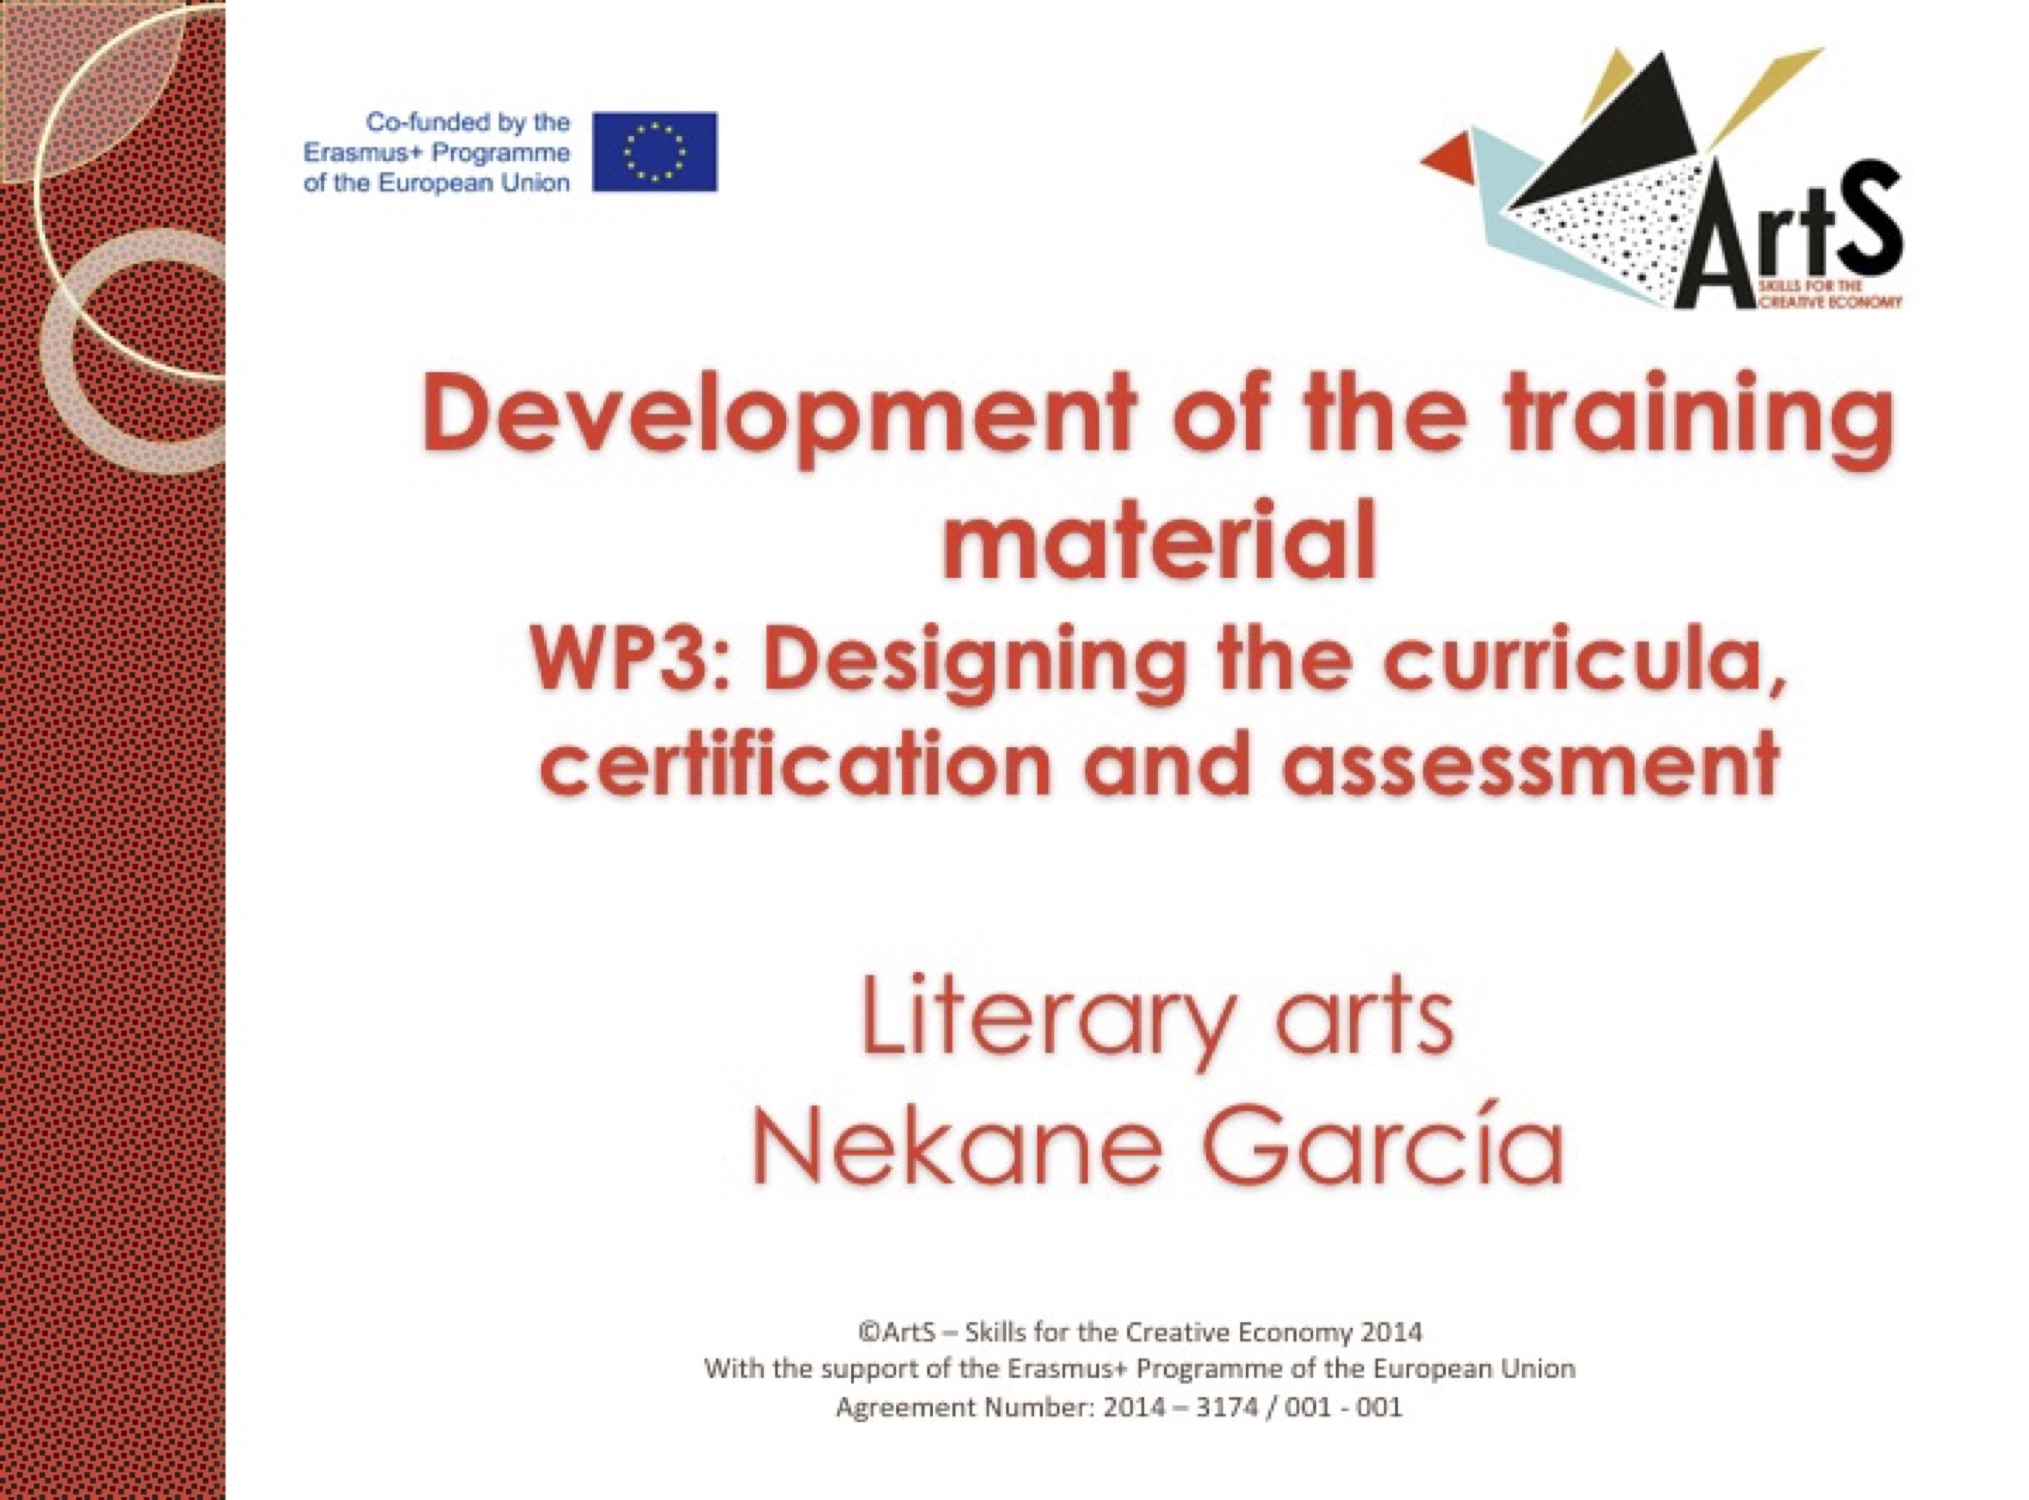 material
WP3: Designing the curricula,
certification and assessment

Literary arts
Nekane Garcia

©ArtS = Skills for the Creative Economy 2014
With the support of the Erasmus+ Programme of the European Union
Agreement Number: 2014 - 3174 / 001 - 001